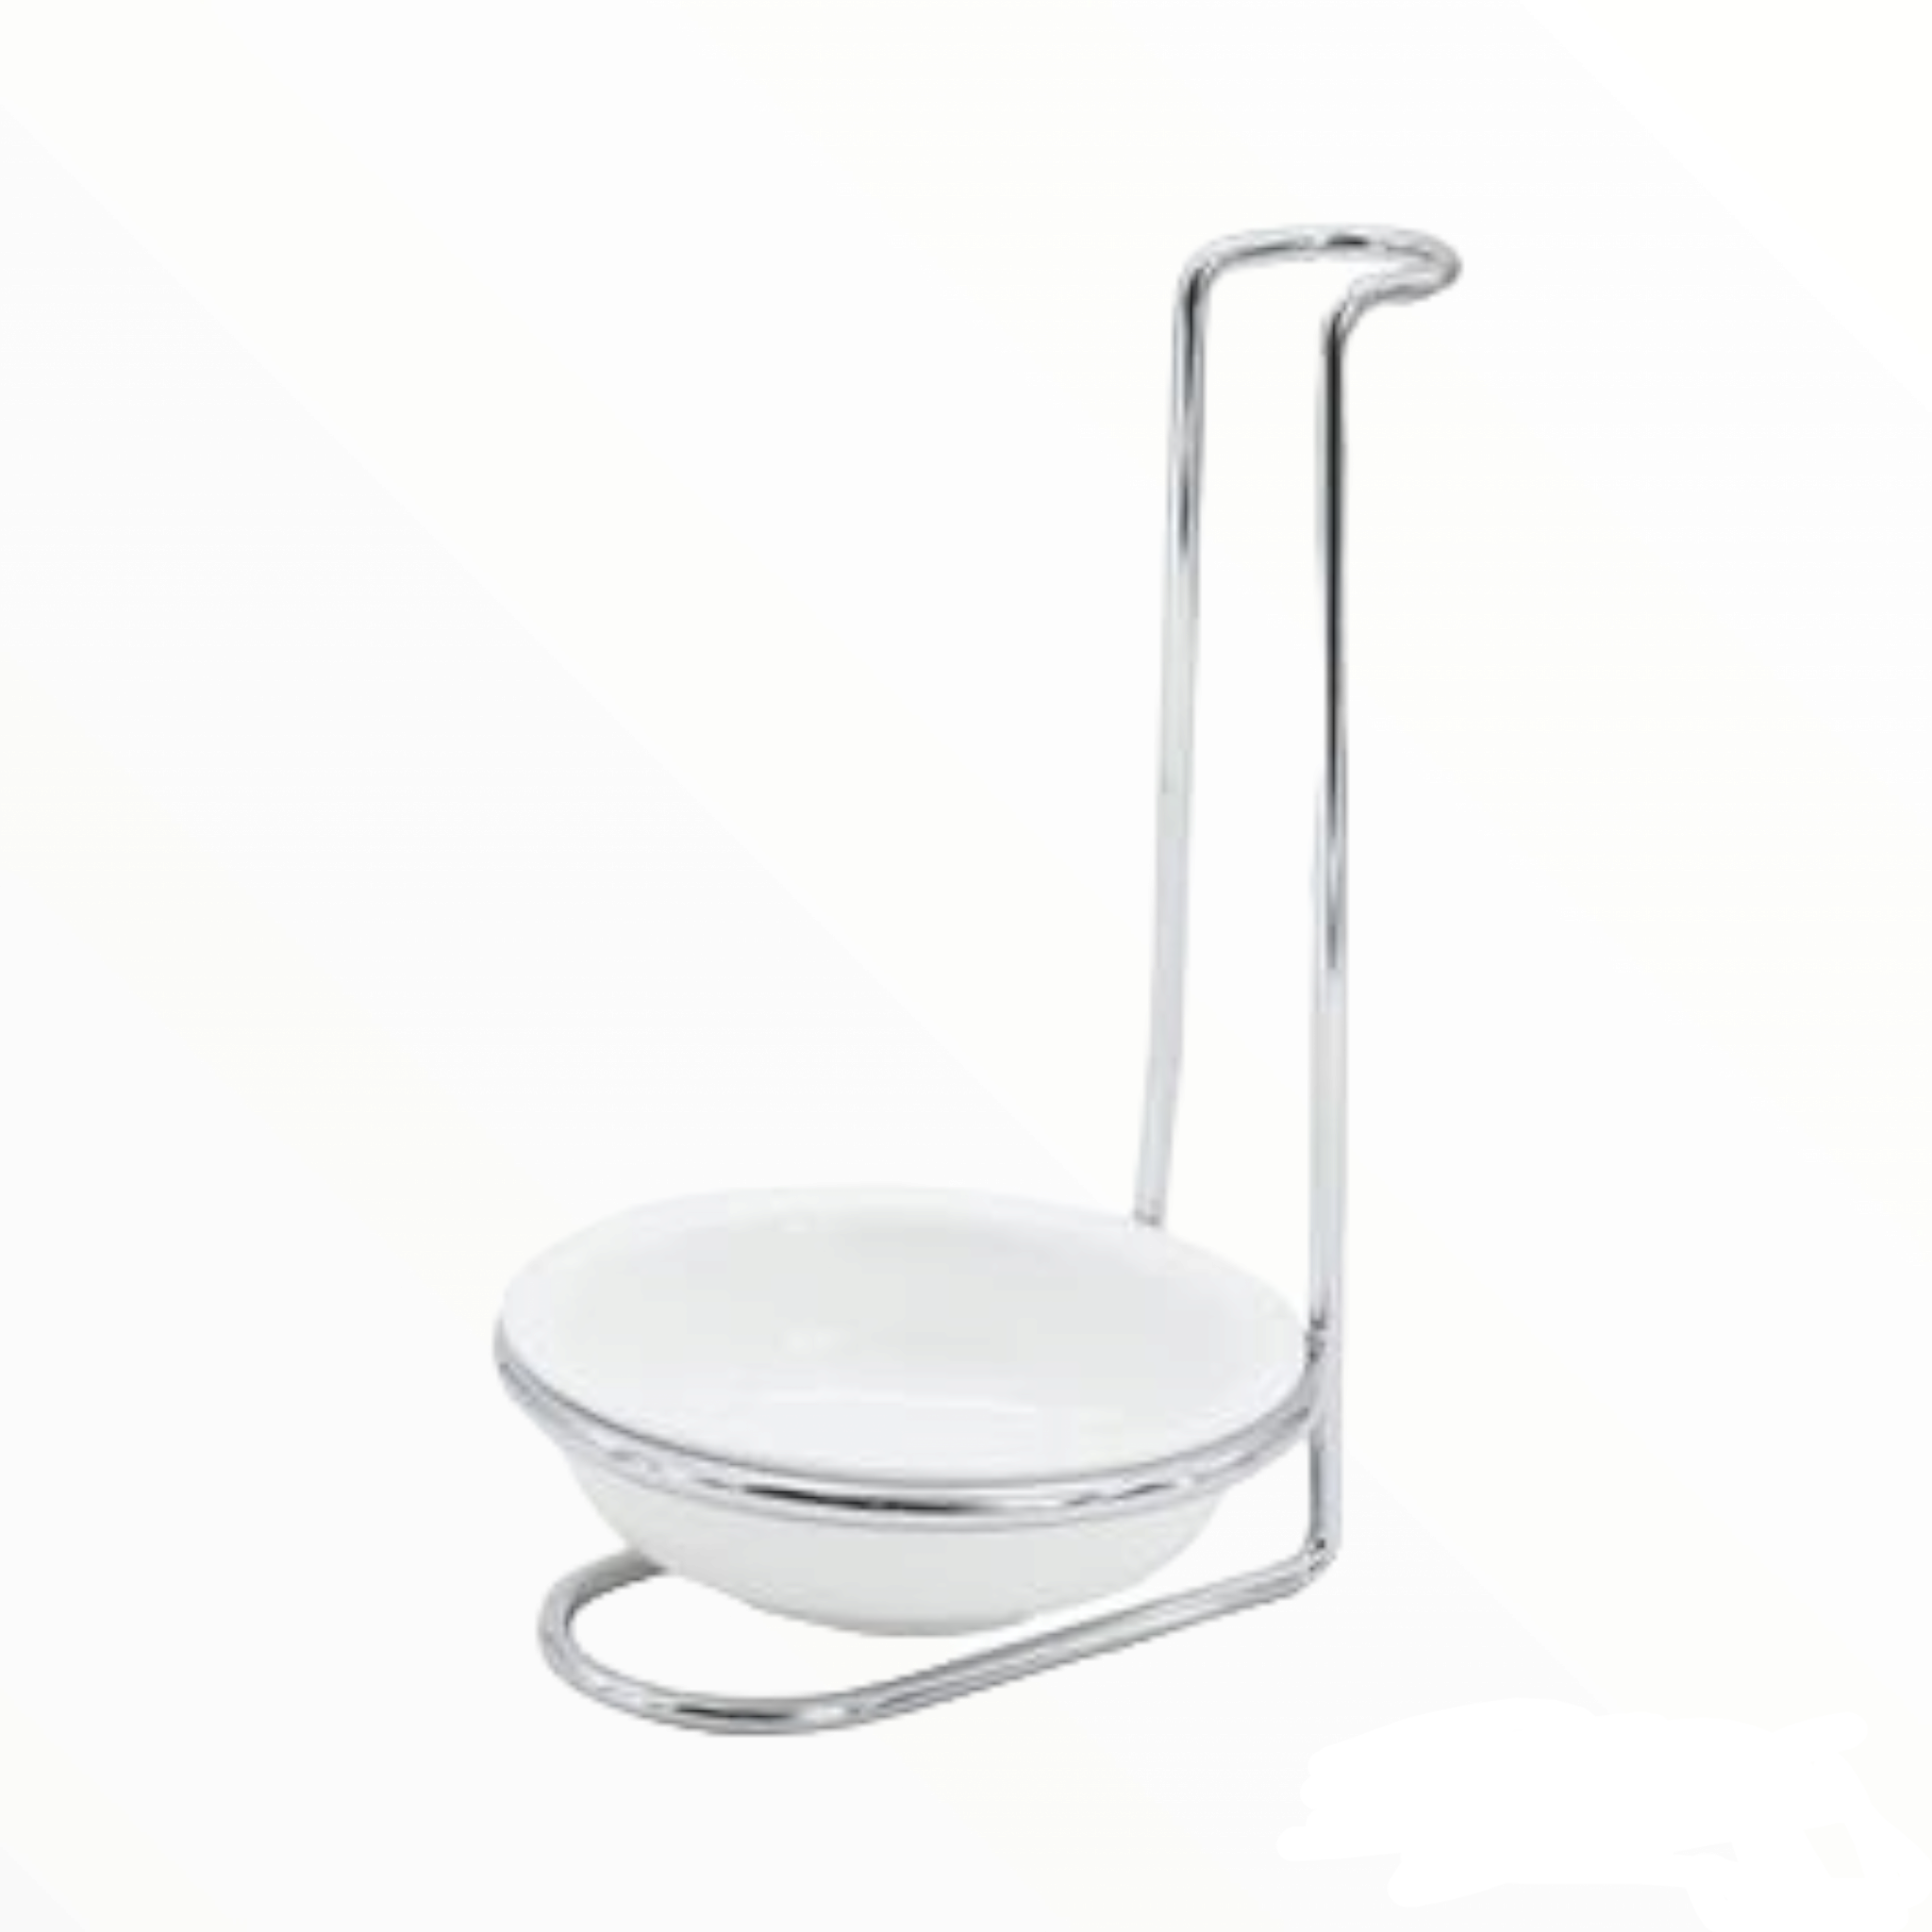 Regent Kitchen Spoon Rest with Ceramic Bowl and Chrome Stand 14015